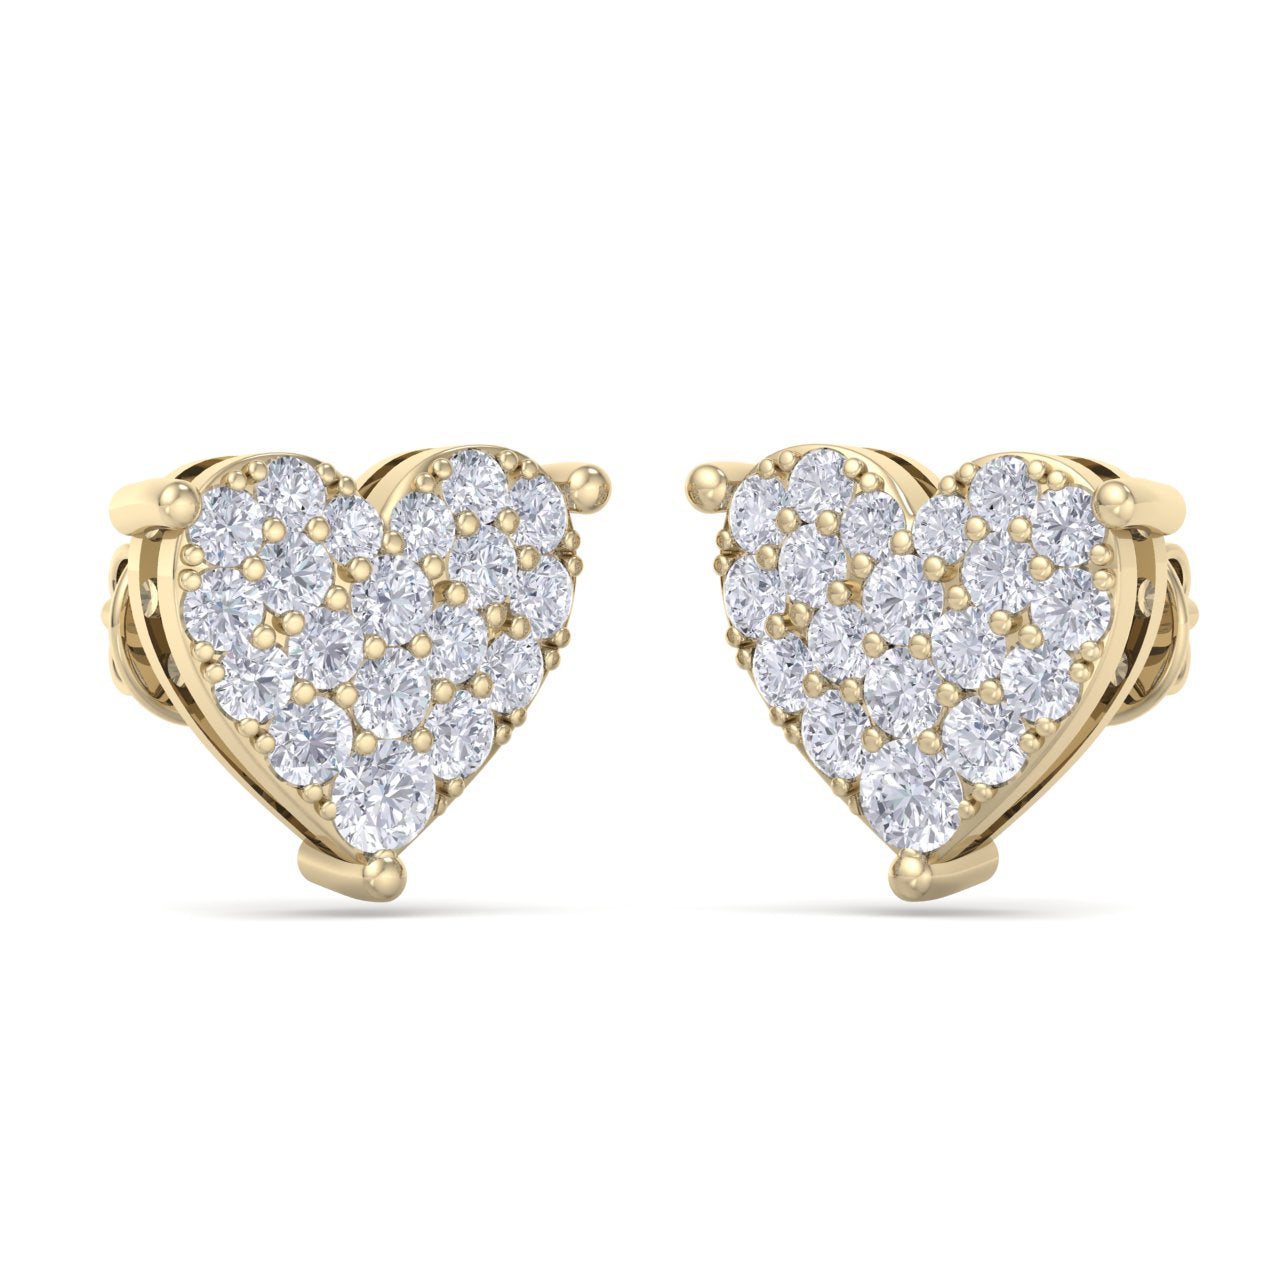 Heart earrings in yellow gold with white diamonds of 1.44 ct in weight